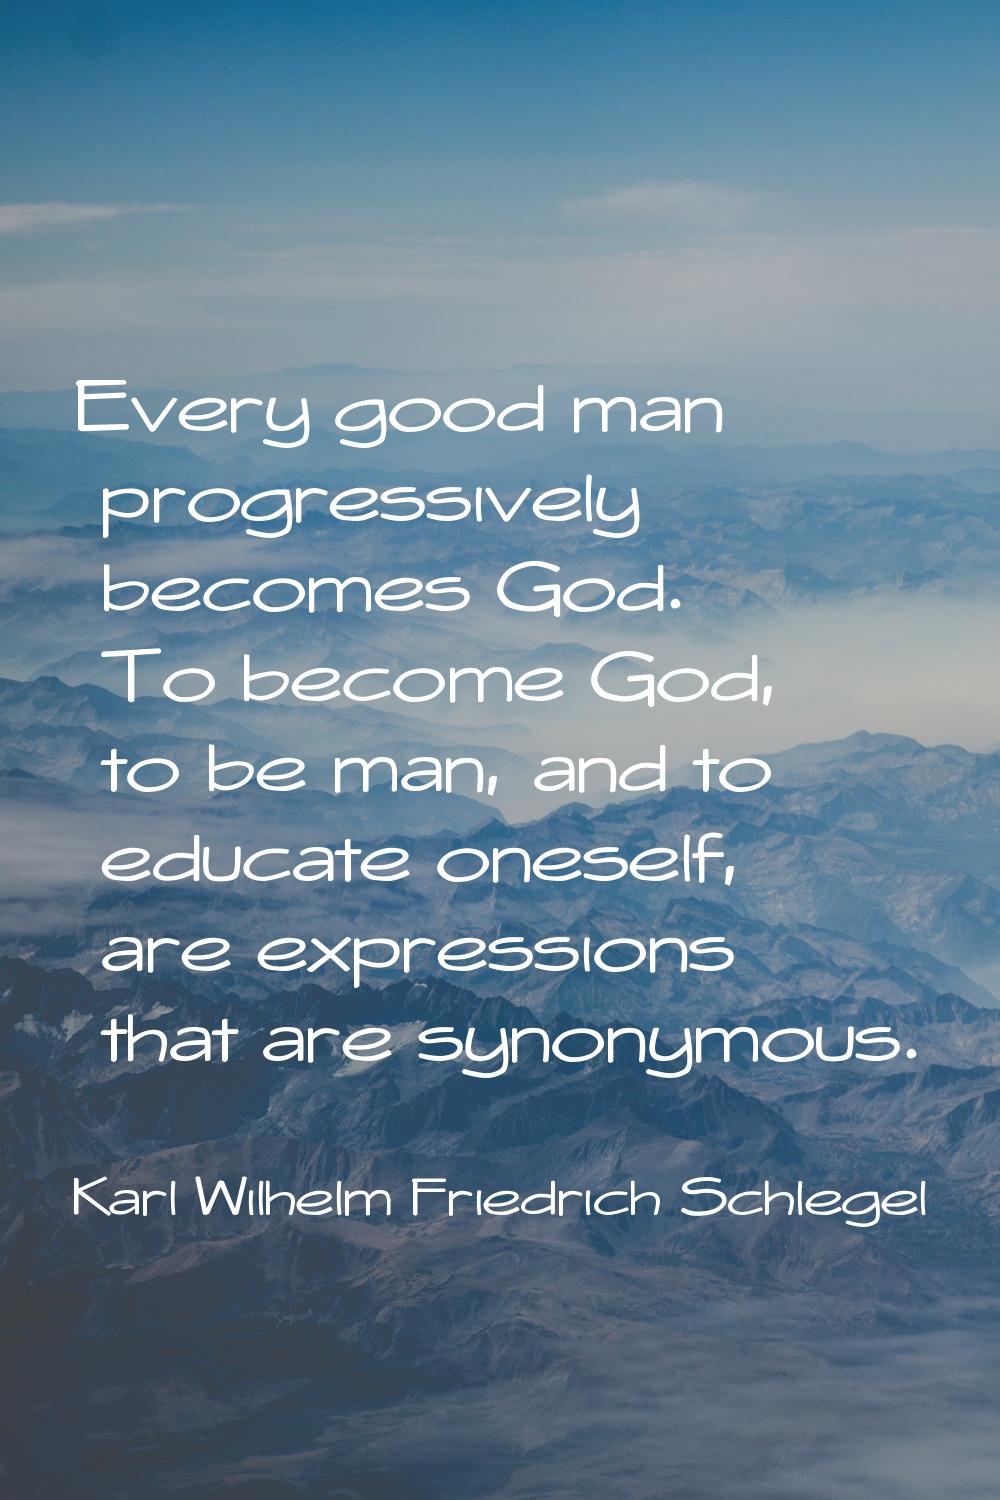 Every good man progressively becomes God. To become God, to be man, and to educate oneself, are exp